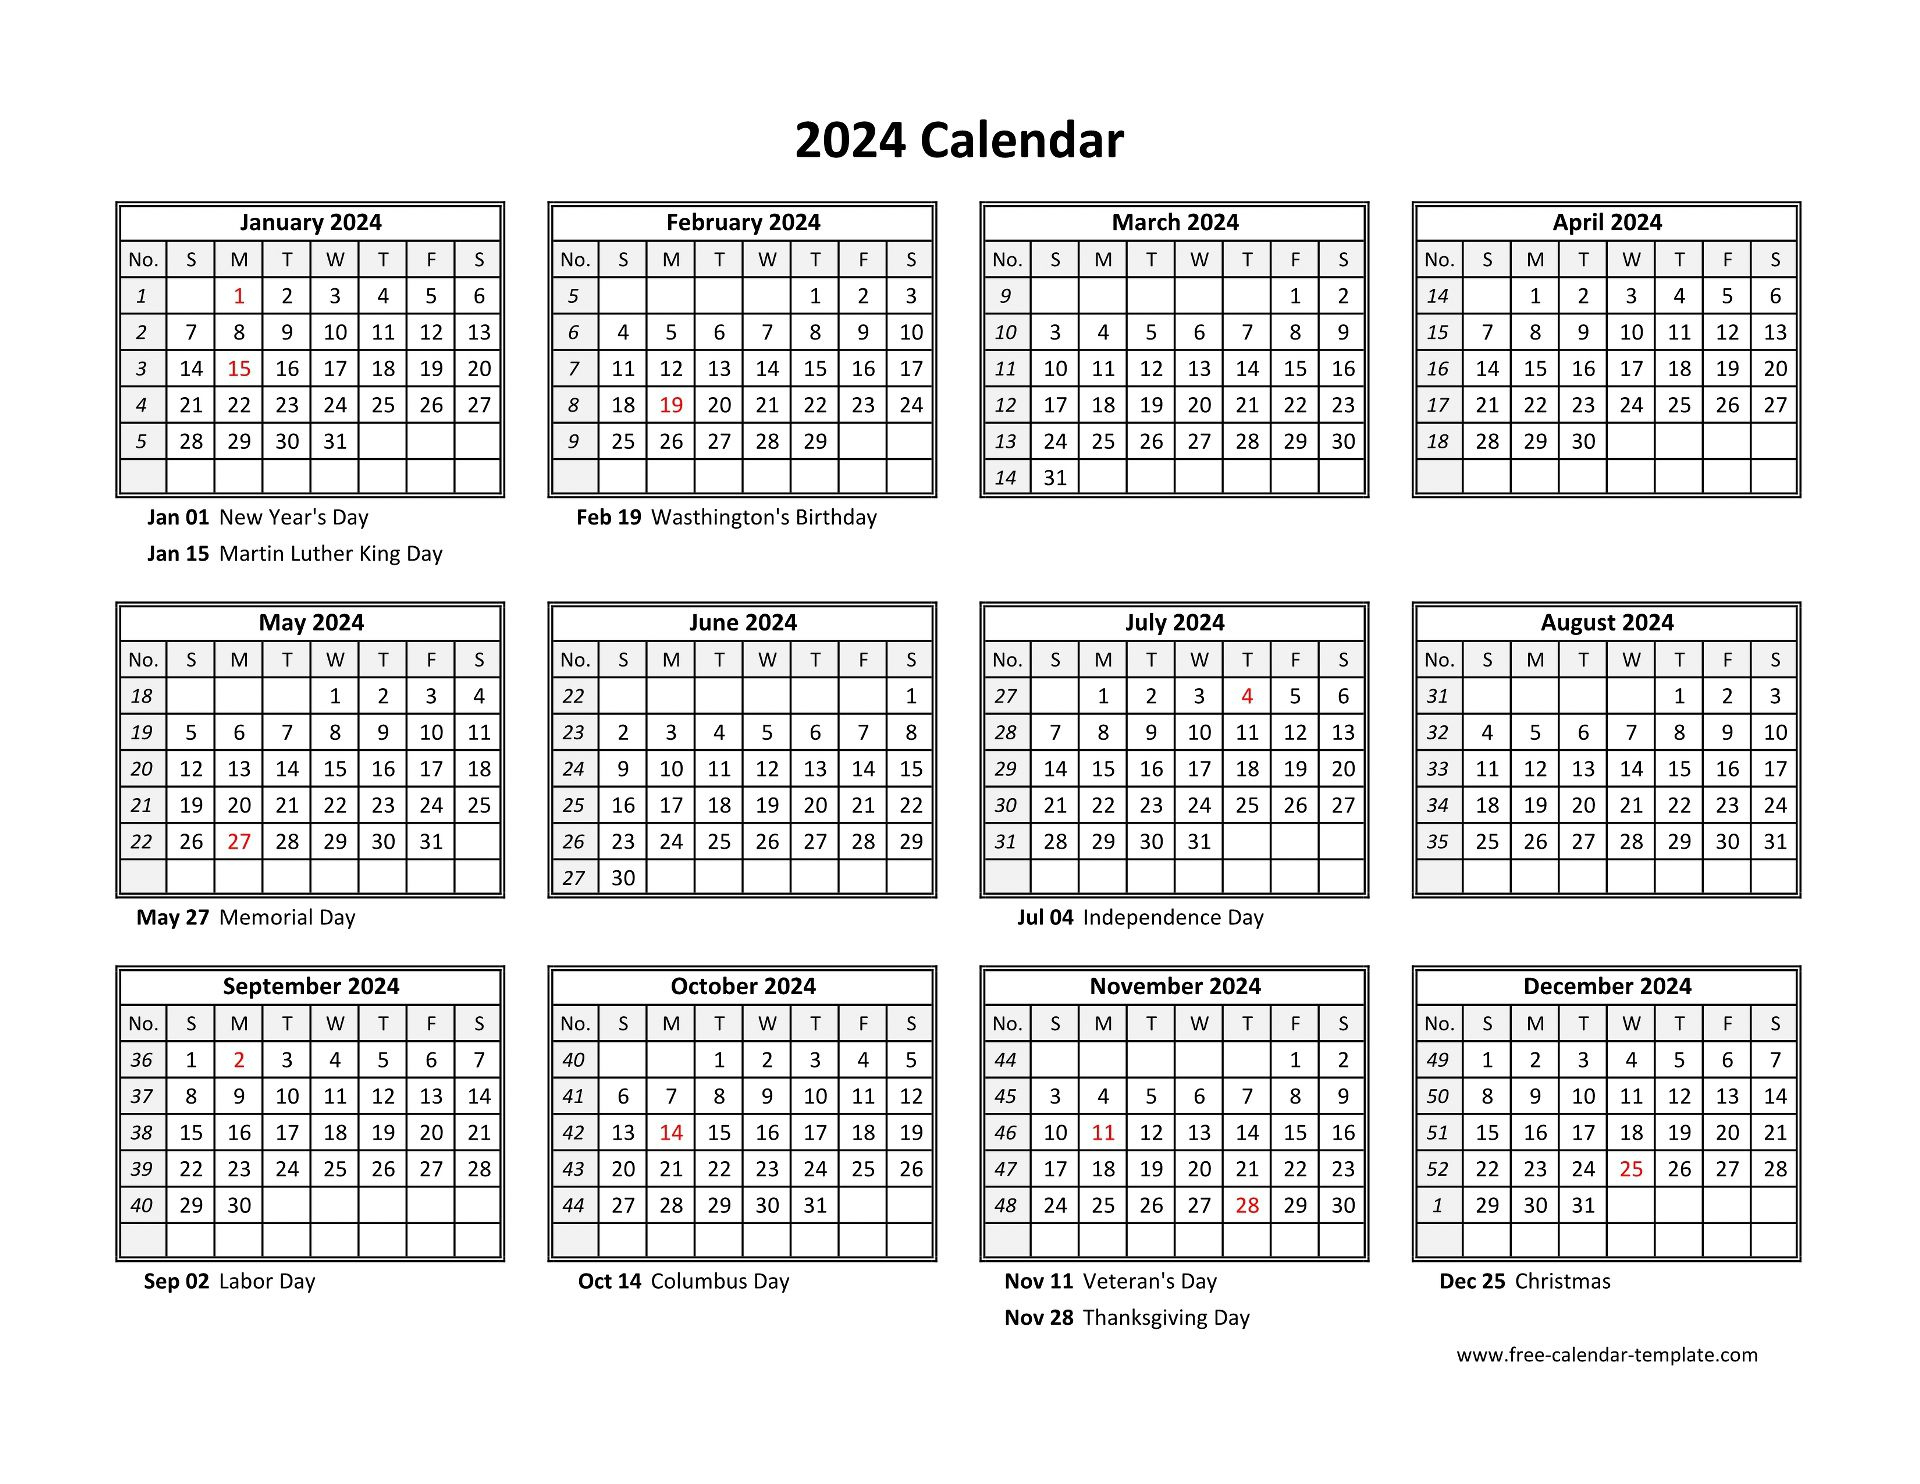 Yearly Calendar 2024 Printable With Federal Holidays | Free | Printable Calendar 2024 With Holidays Printable Pdf